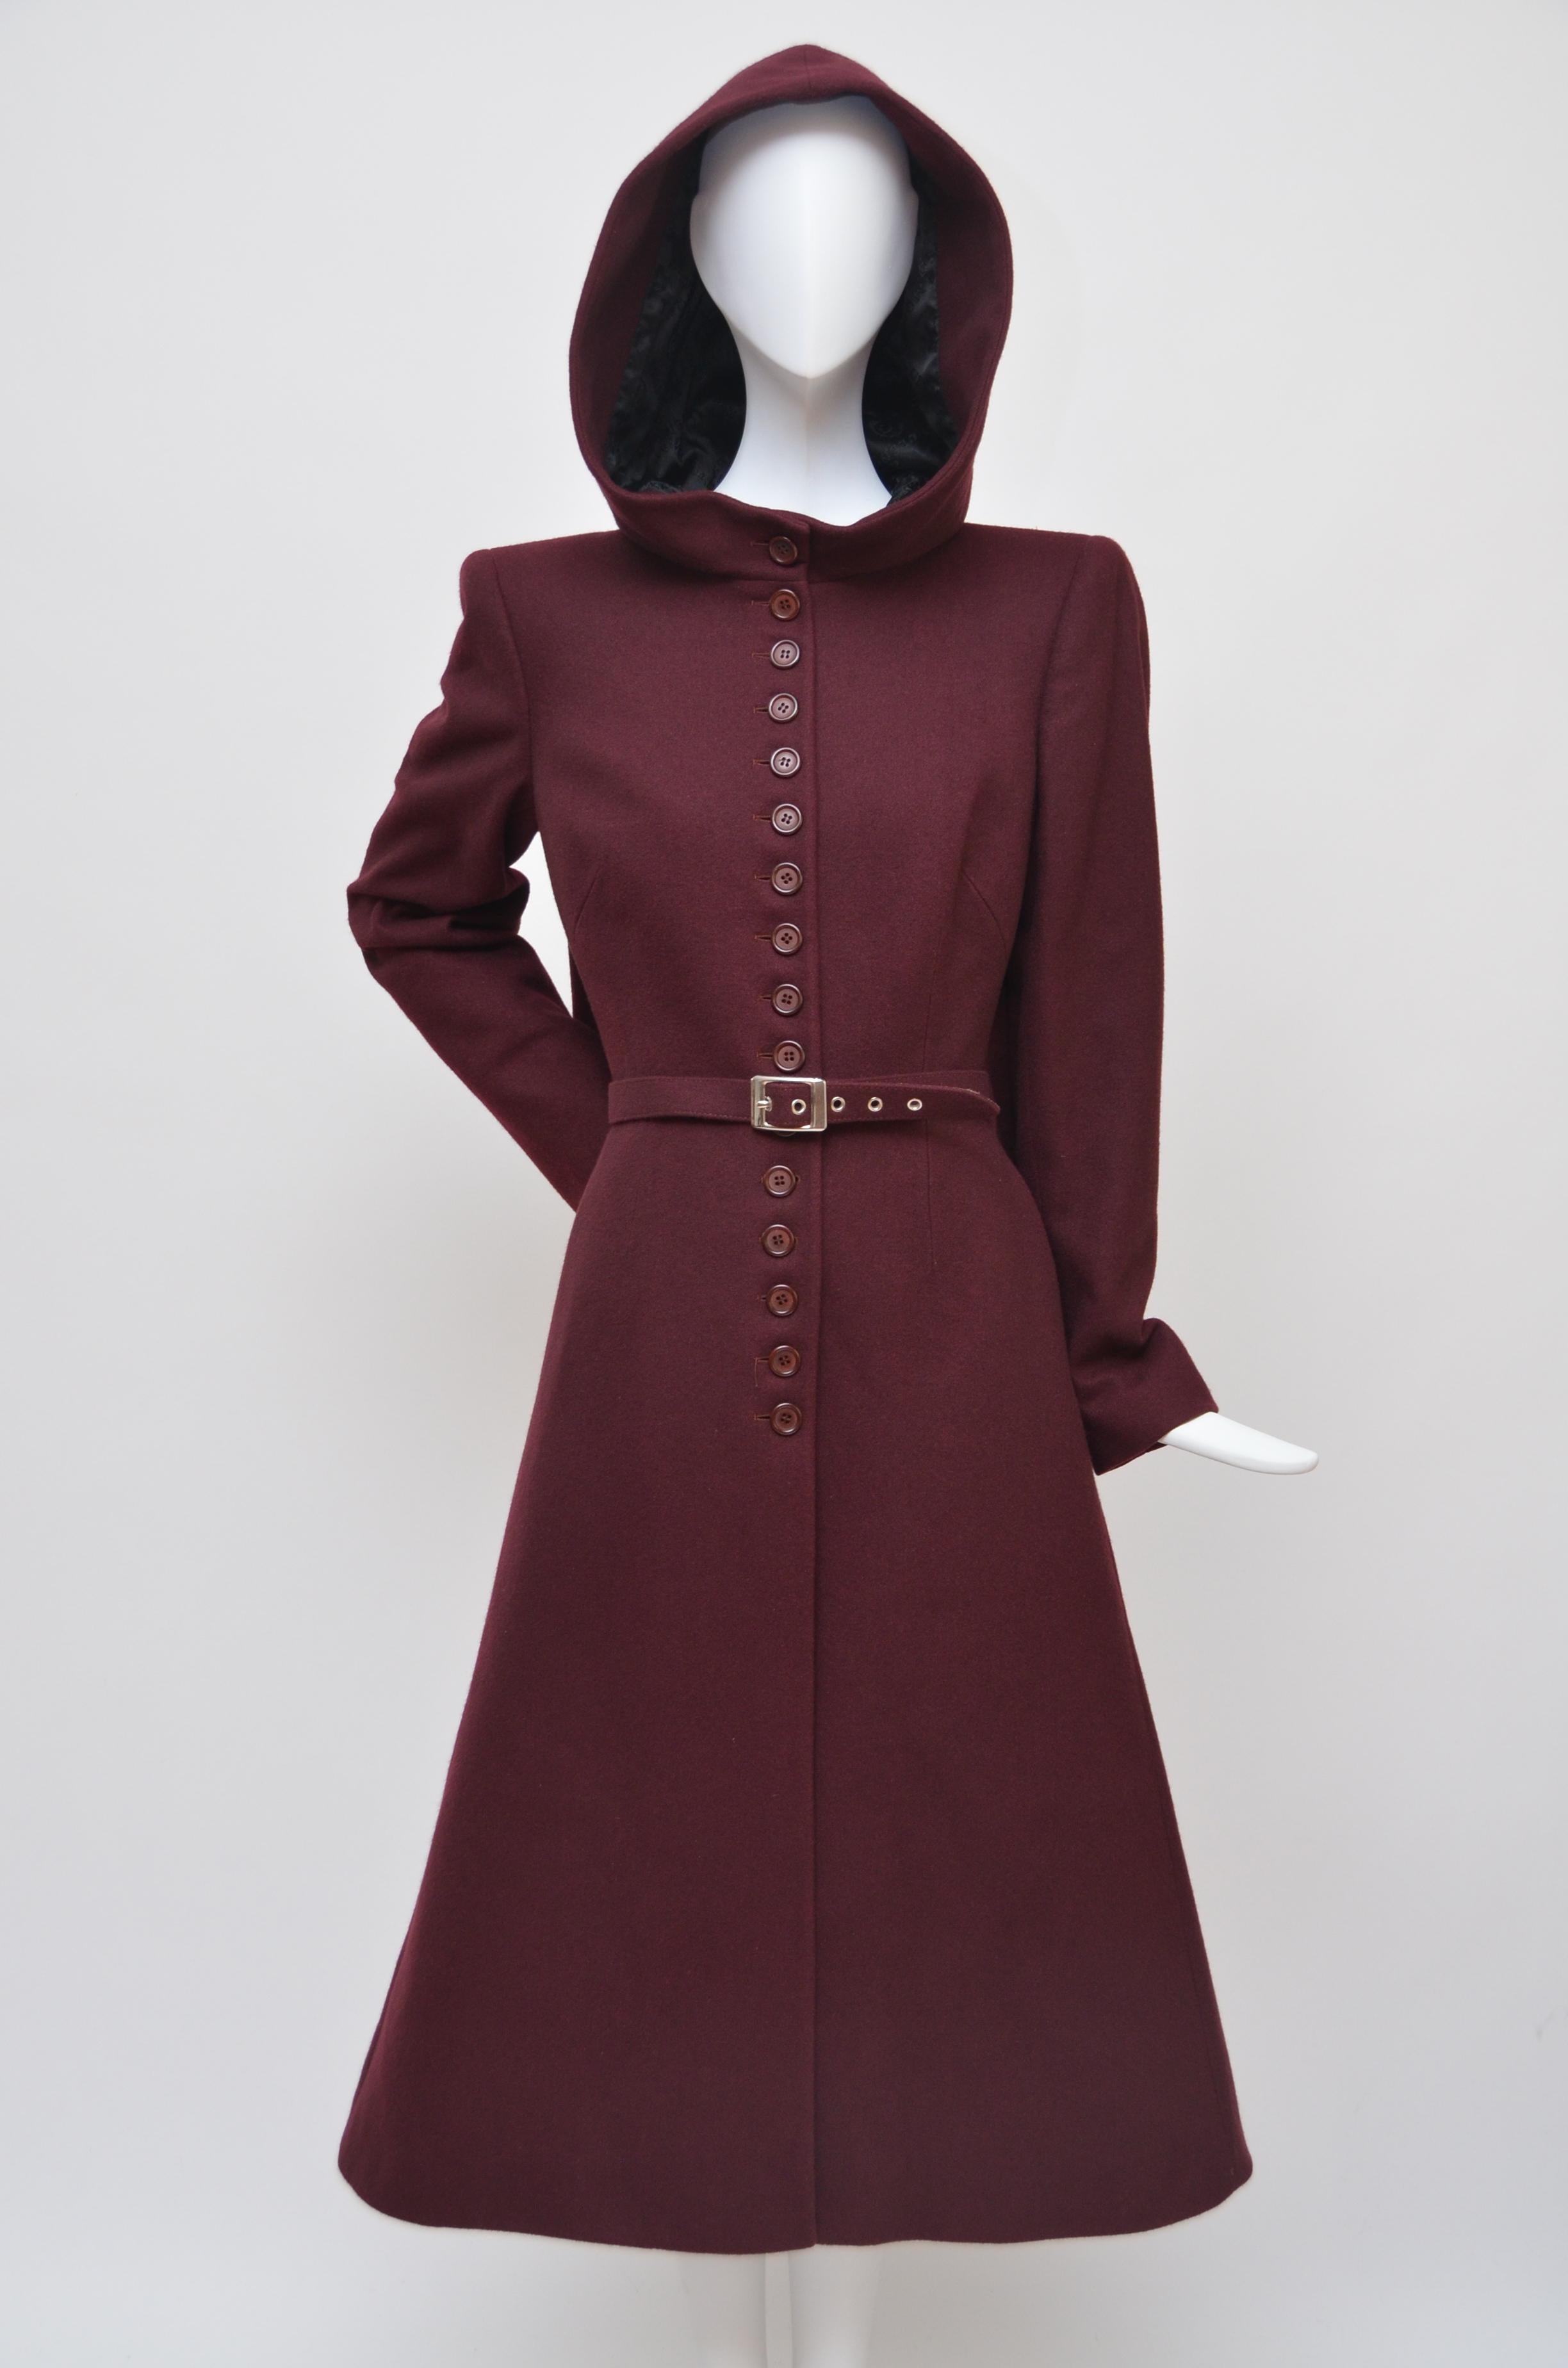 Alexander McQueen burgundy coat with hood.
Exact coat as seen at  this runway  1998 collection.
Coat has belt opening on the side and comes with original belt.
Lined in black Alexander McQueen signature print fabric.
Button closure . Excellent mint